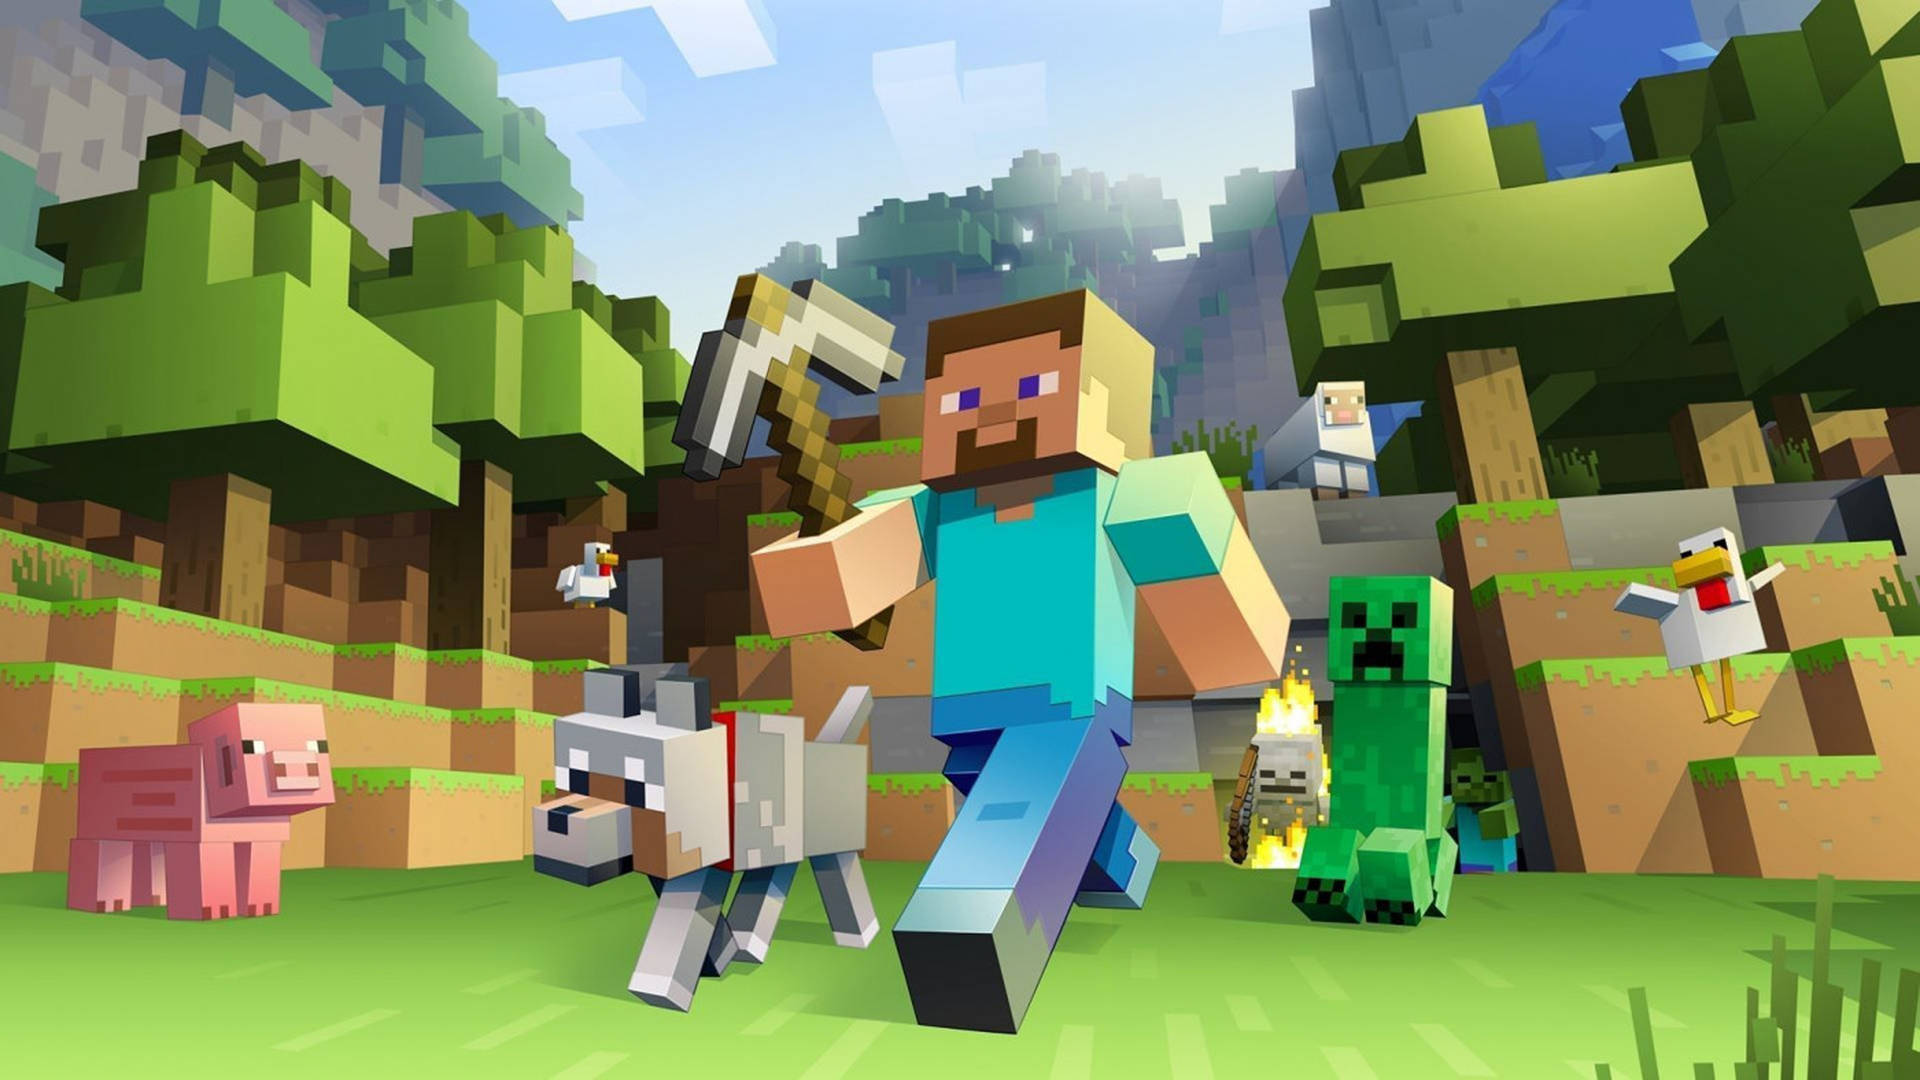 Steve Armed With Pickaxe 2560x1440 Minecraft Wallpaper